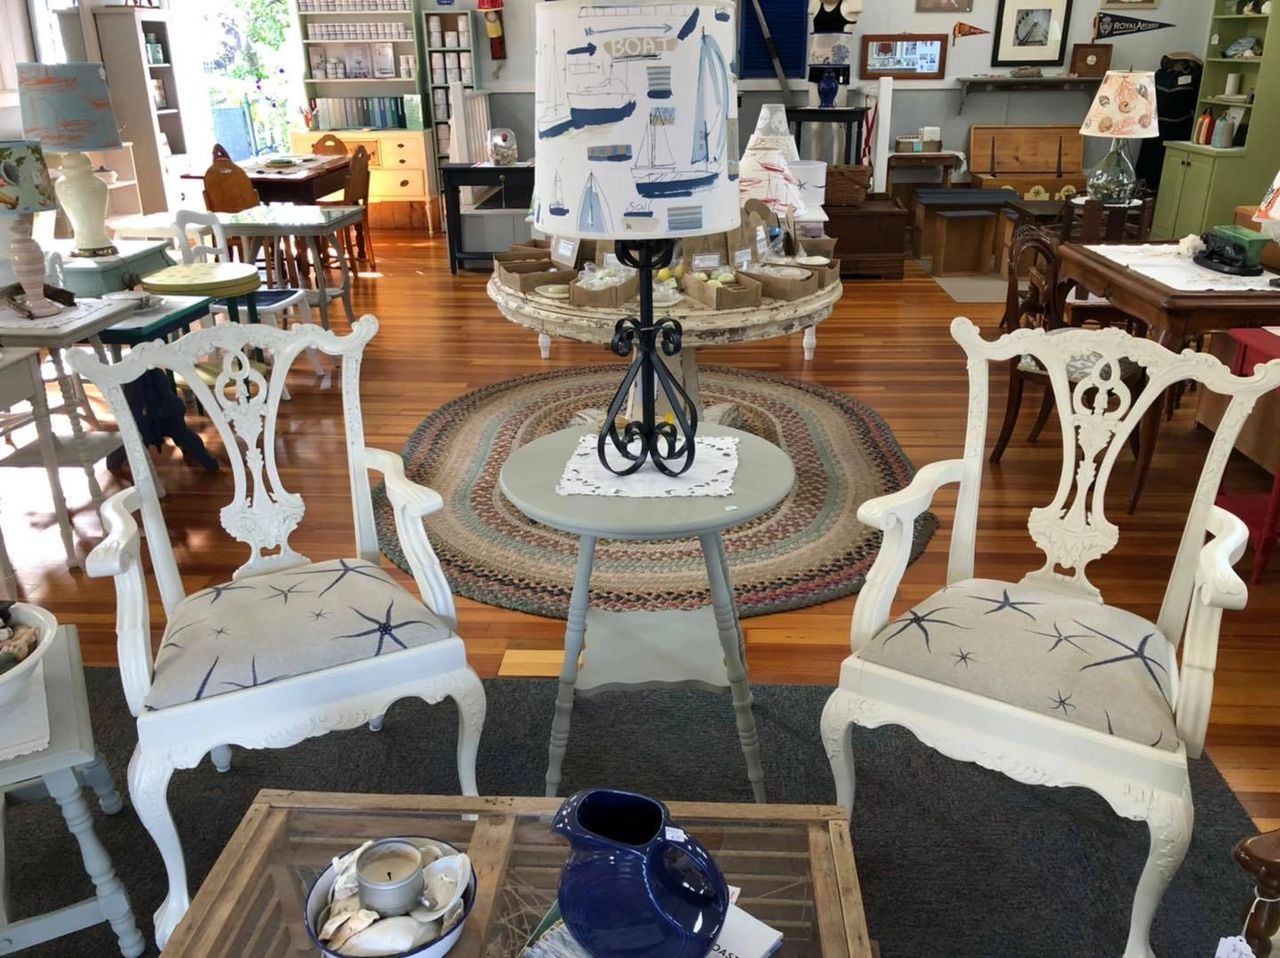 Monthly Business Spotlight -Cottage Decor 57 Saco Ave, OOB